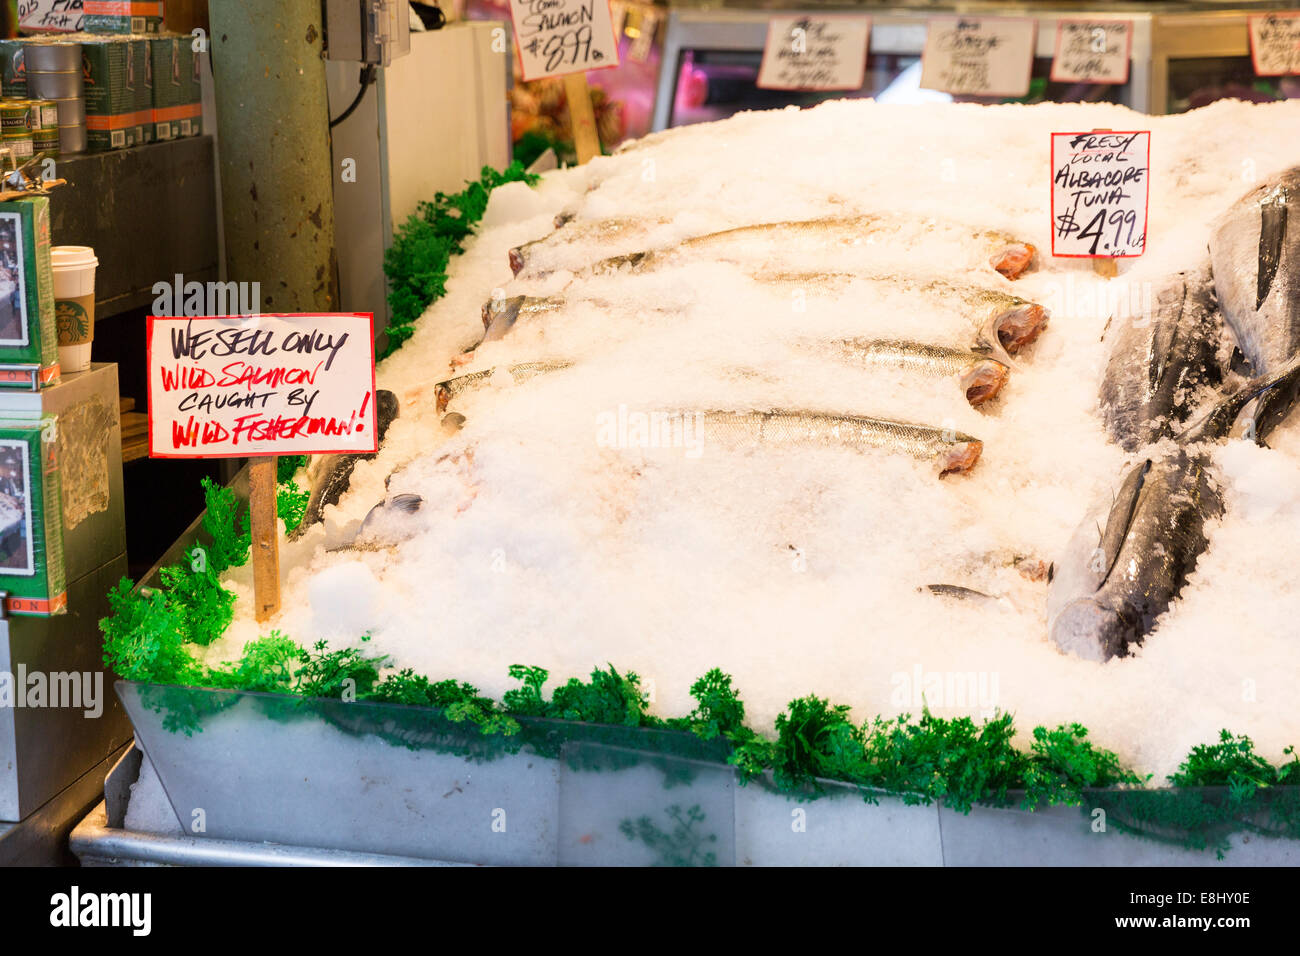 Wild caught albacore tuna on the display at the world famous Pike Place Fish Market stand Seattle, Washington, USA Stock Photo